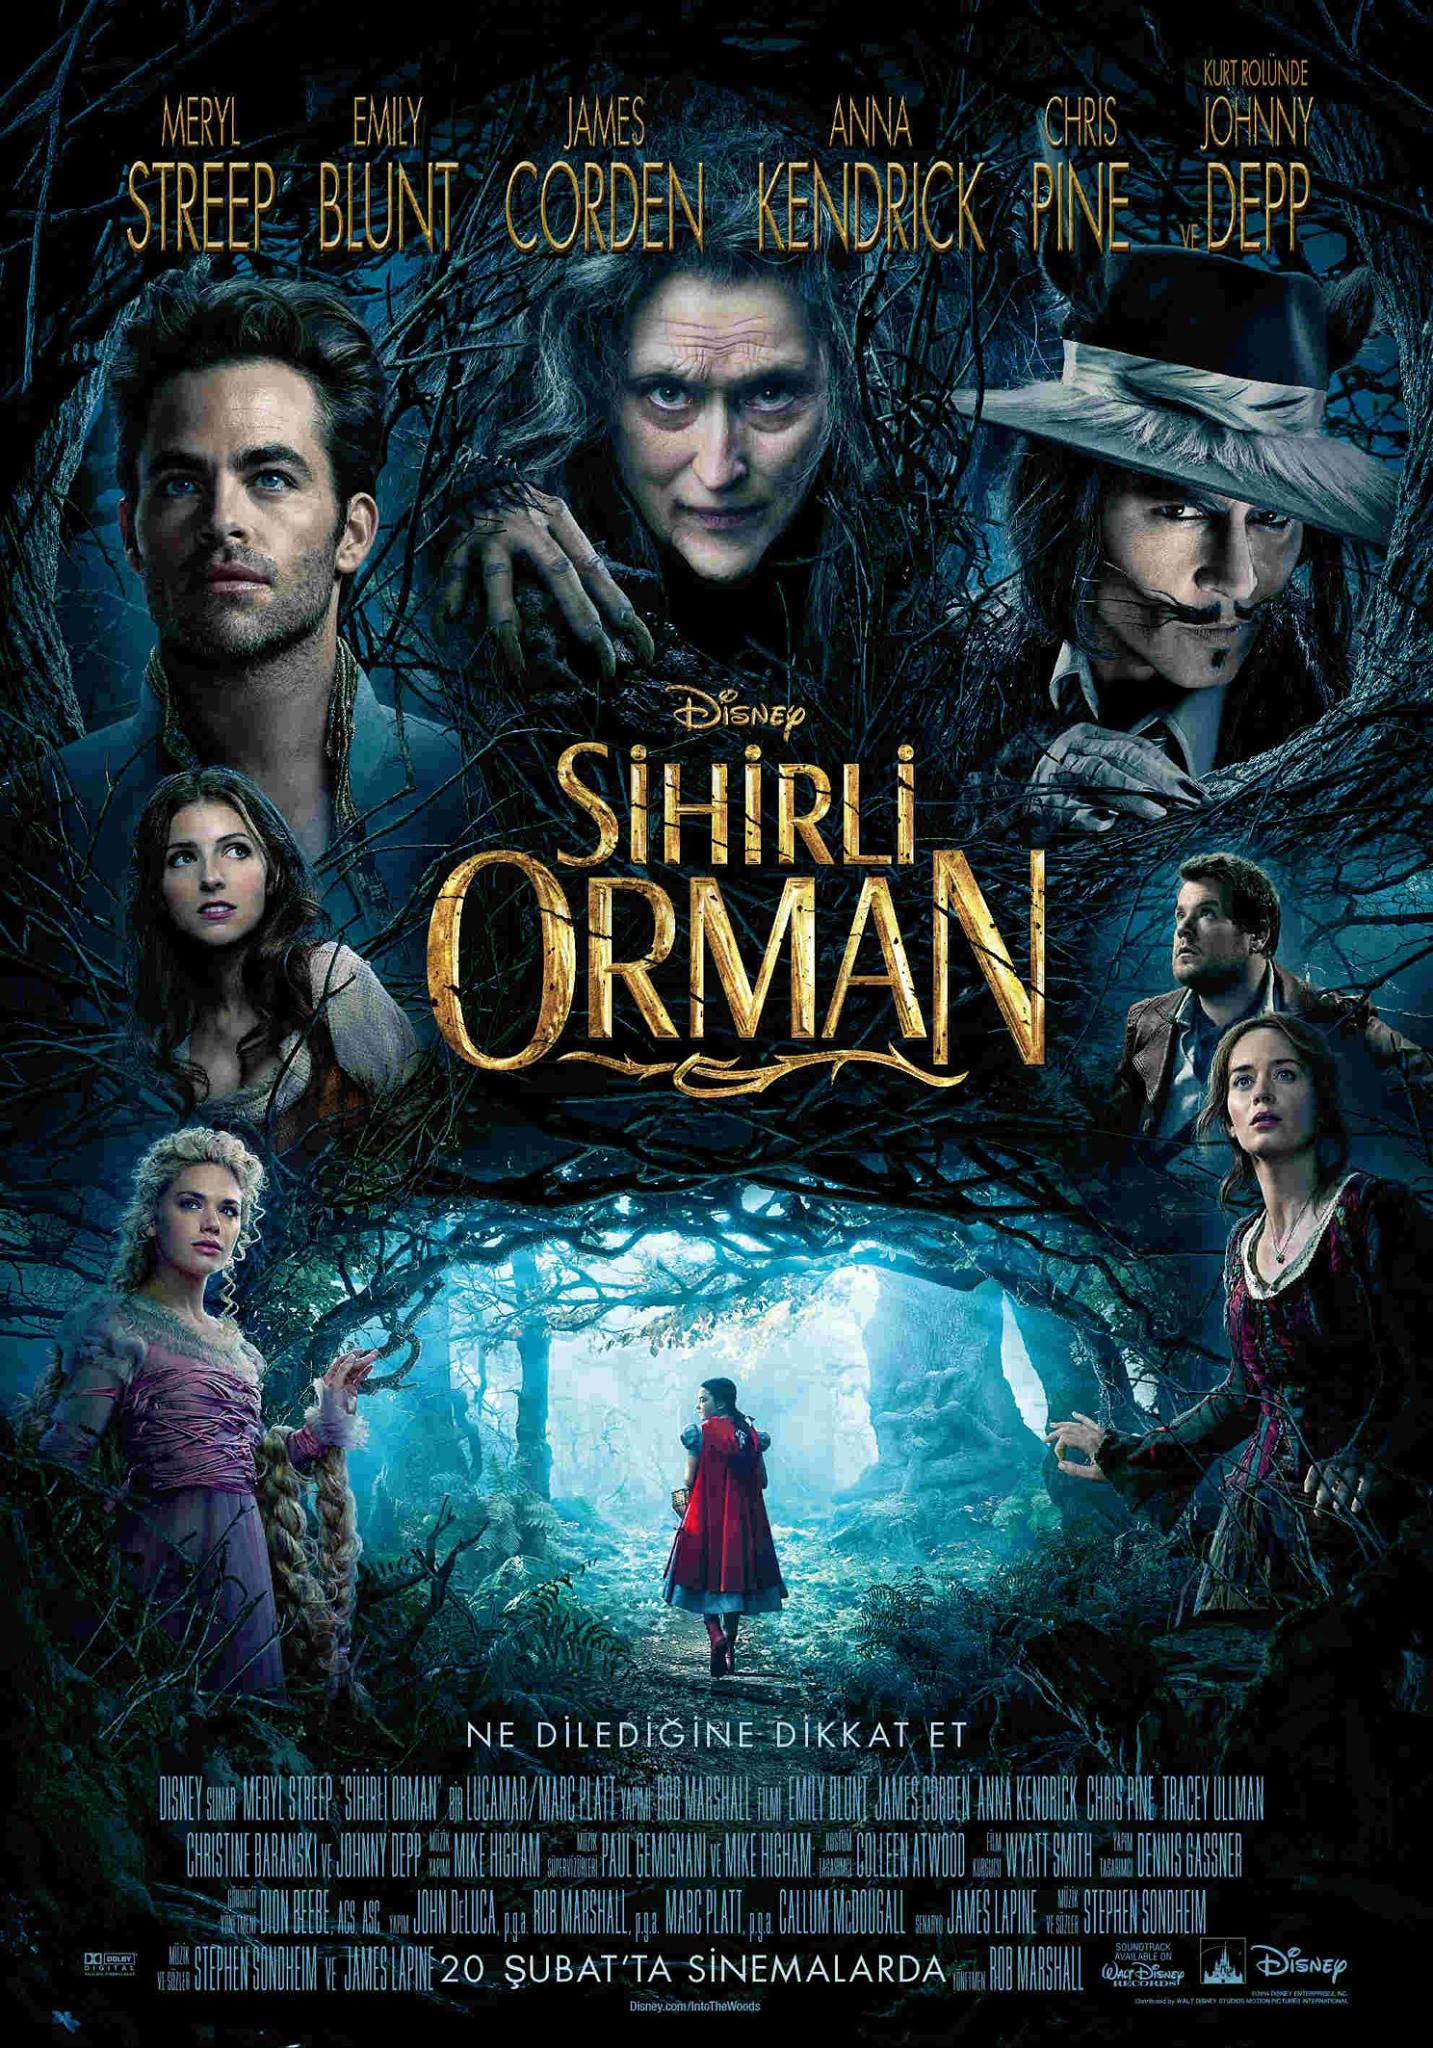 Into the Woods-Sihirli Orman